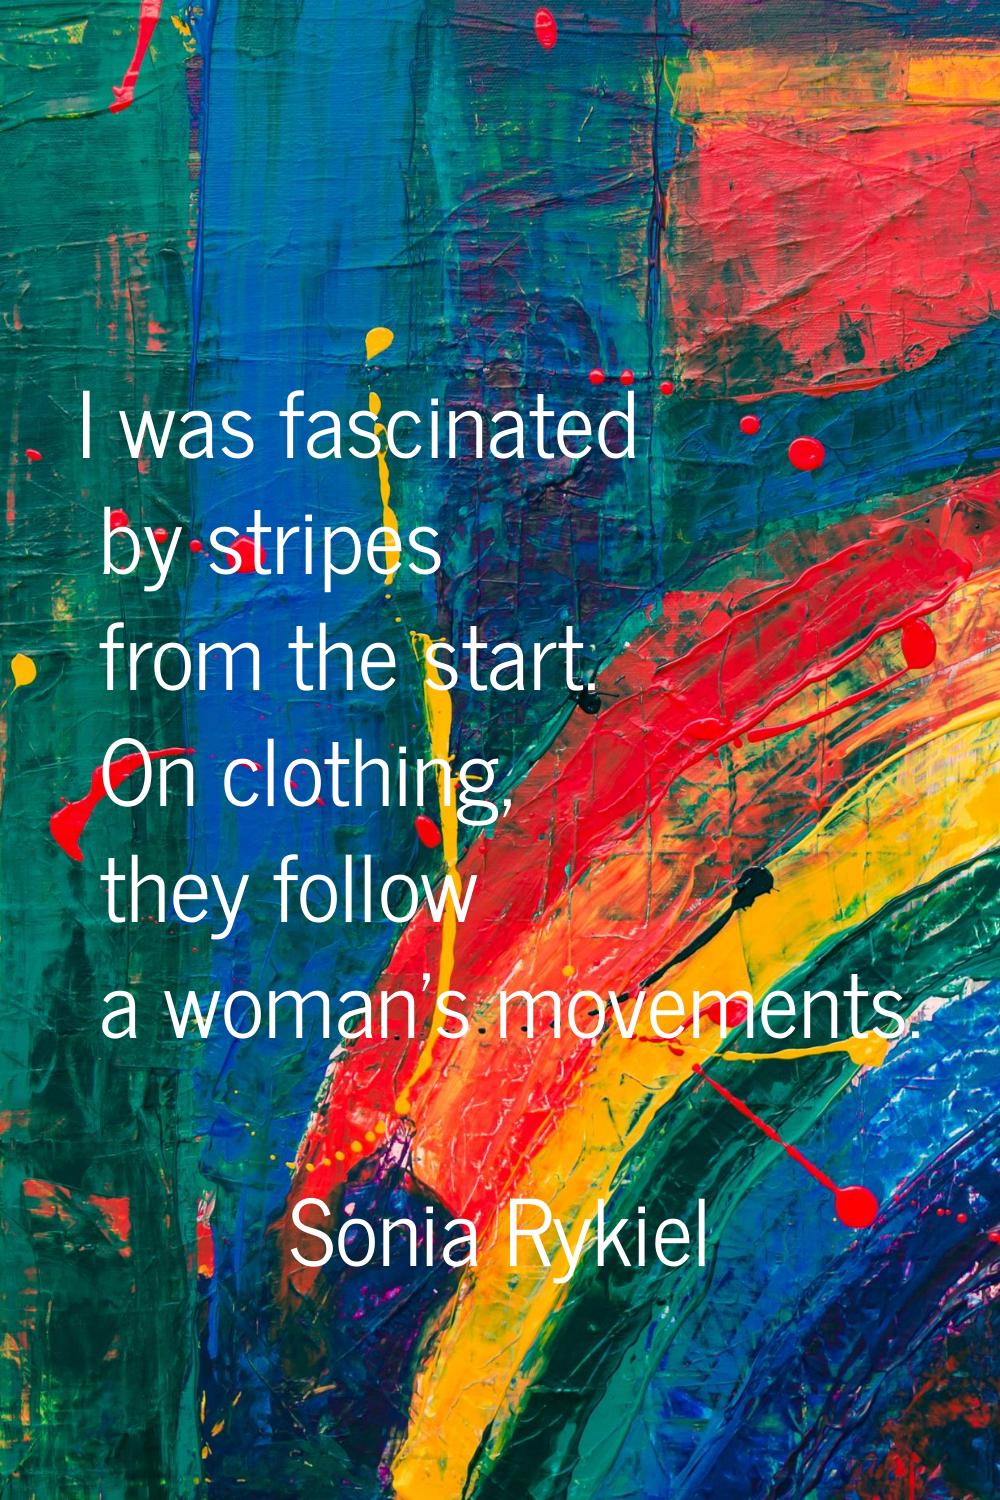 I was fascinated by stripes from the start. On clothing, they follow a woman's movements.